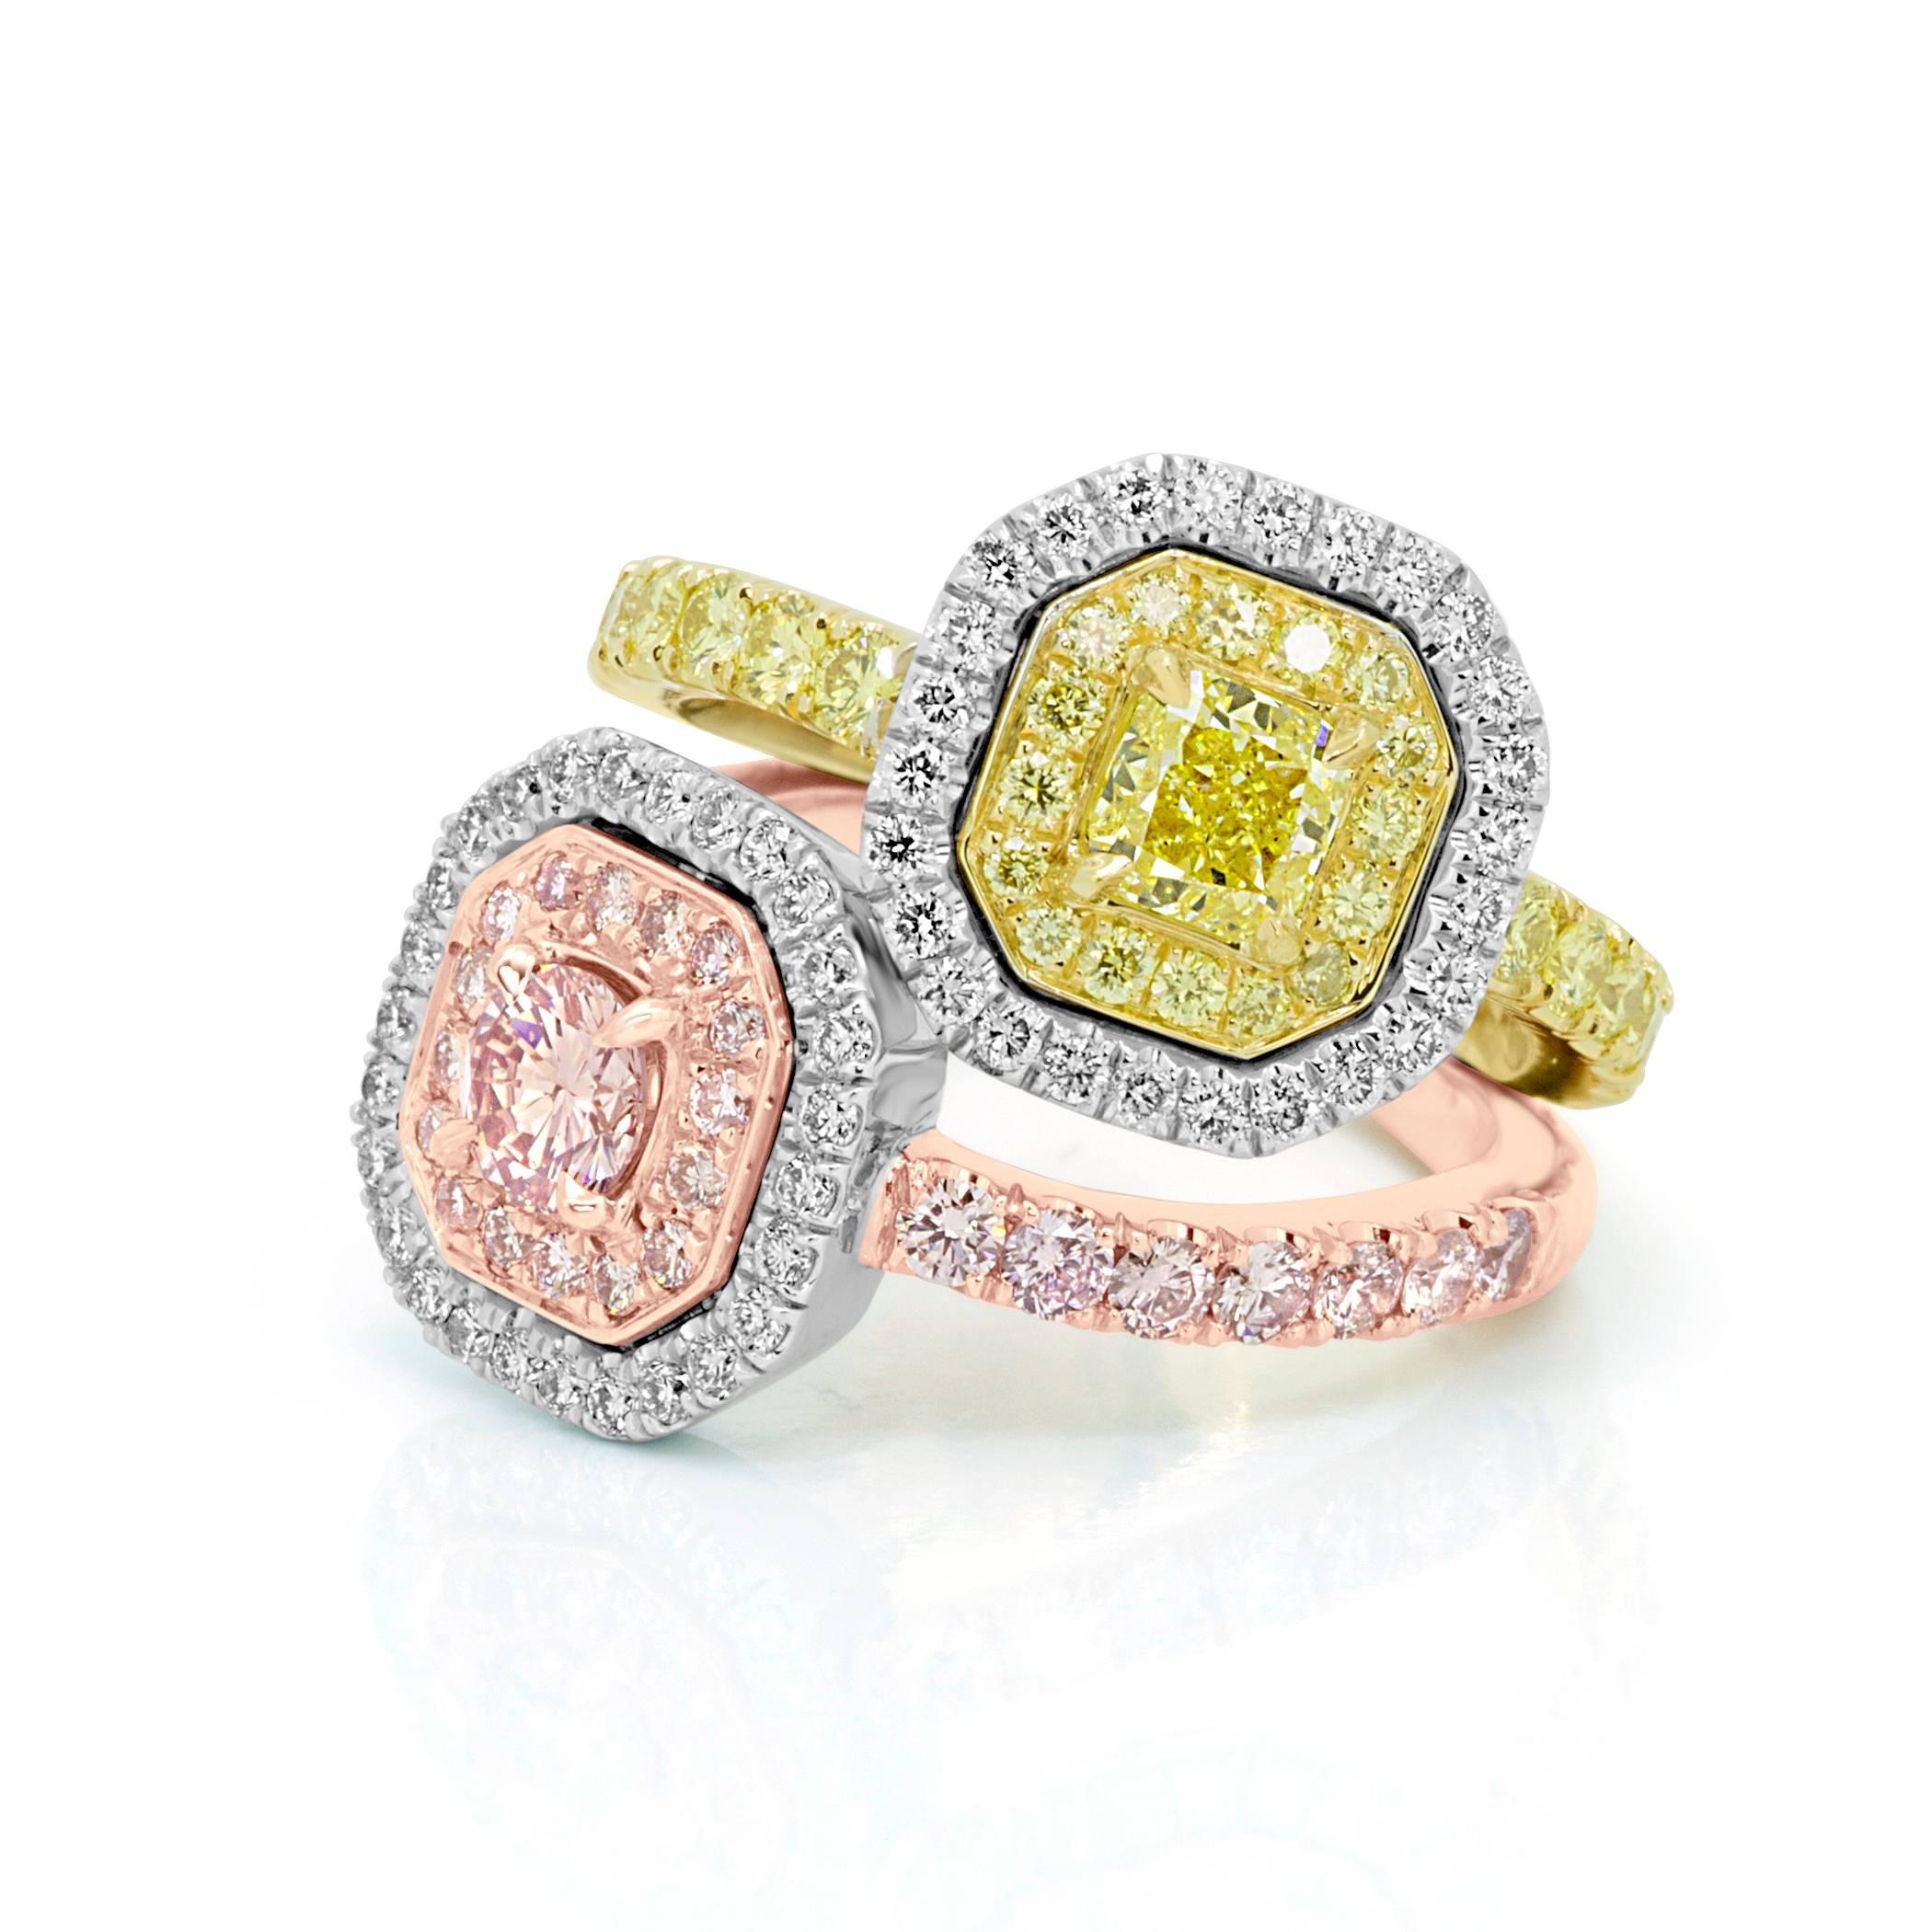 Radiant Cut Pink and Yellow Diamond Toi Et Moi Ring Three Color Gold Fashion Cocktail Ring